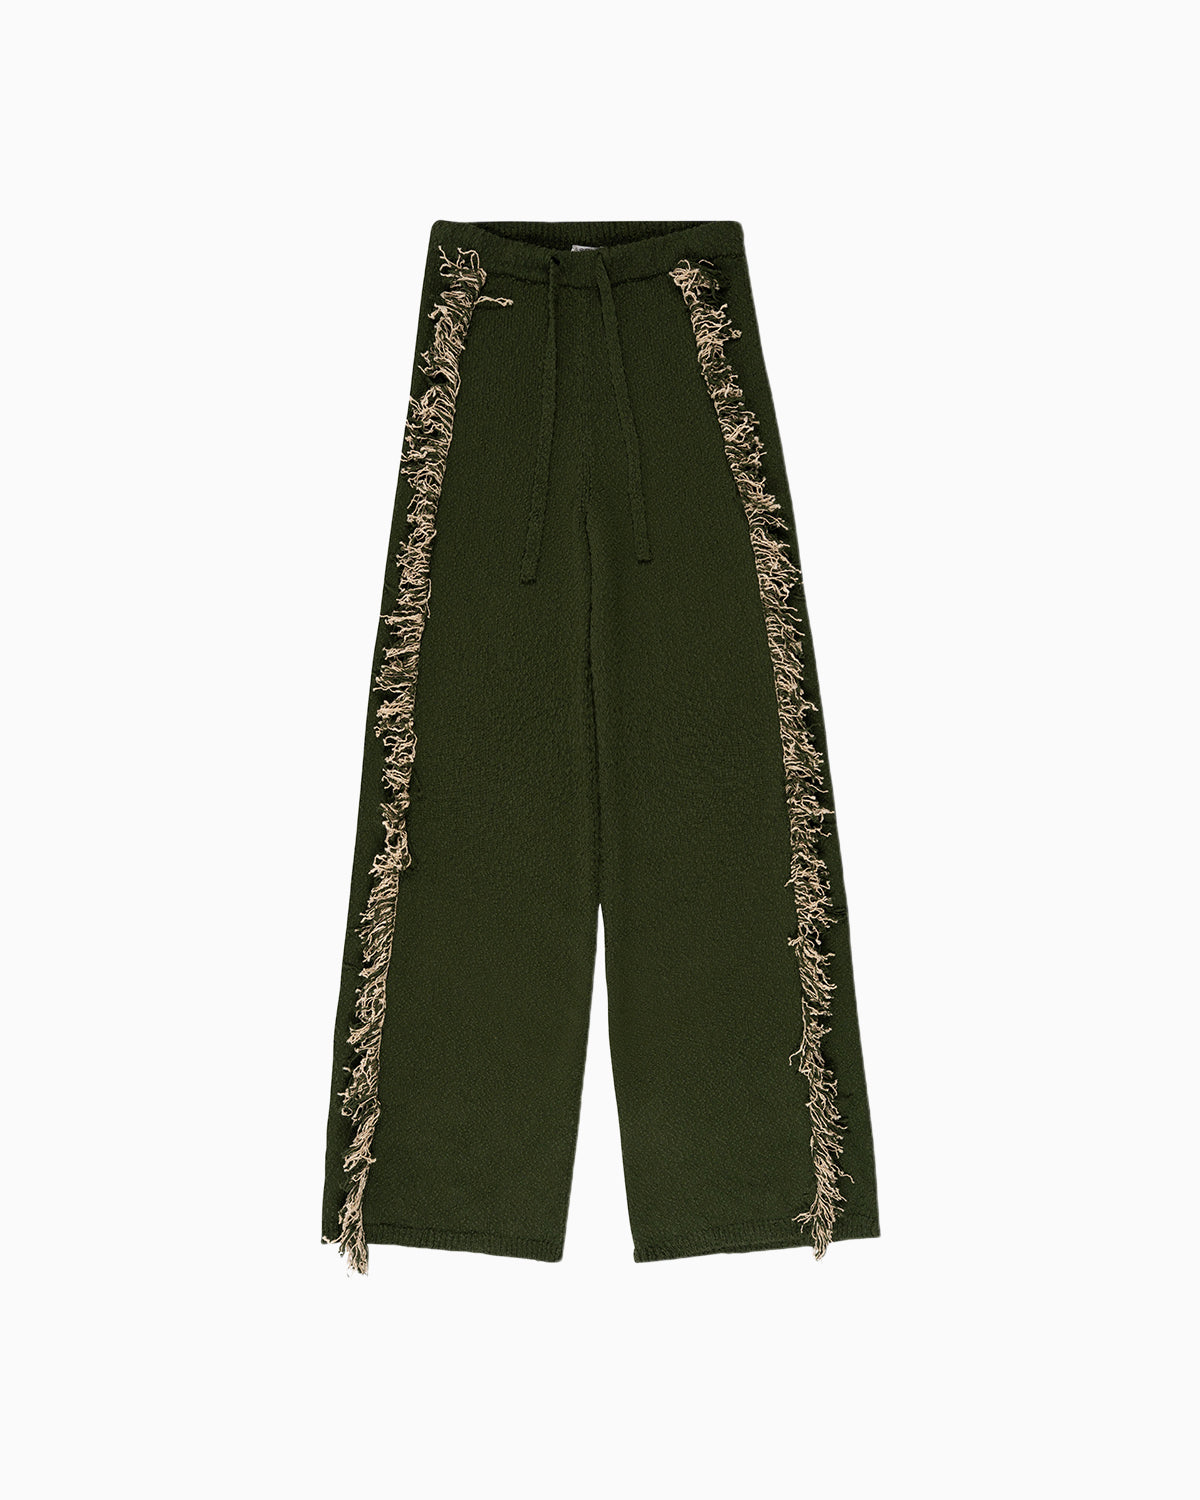 Andy Fringe Knit Pants in green by Aseye Studio